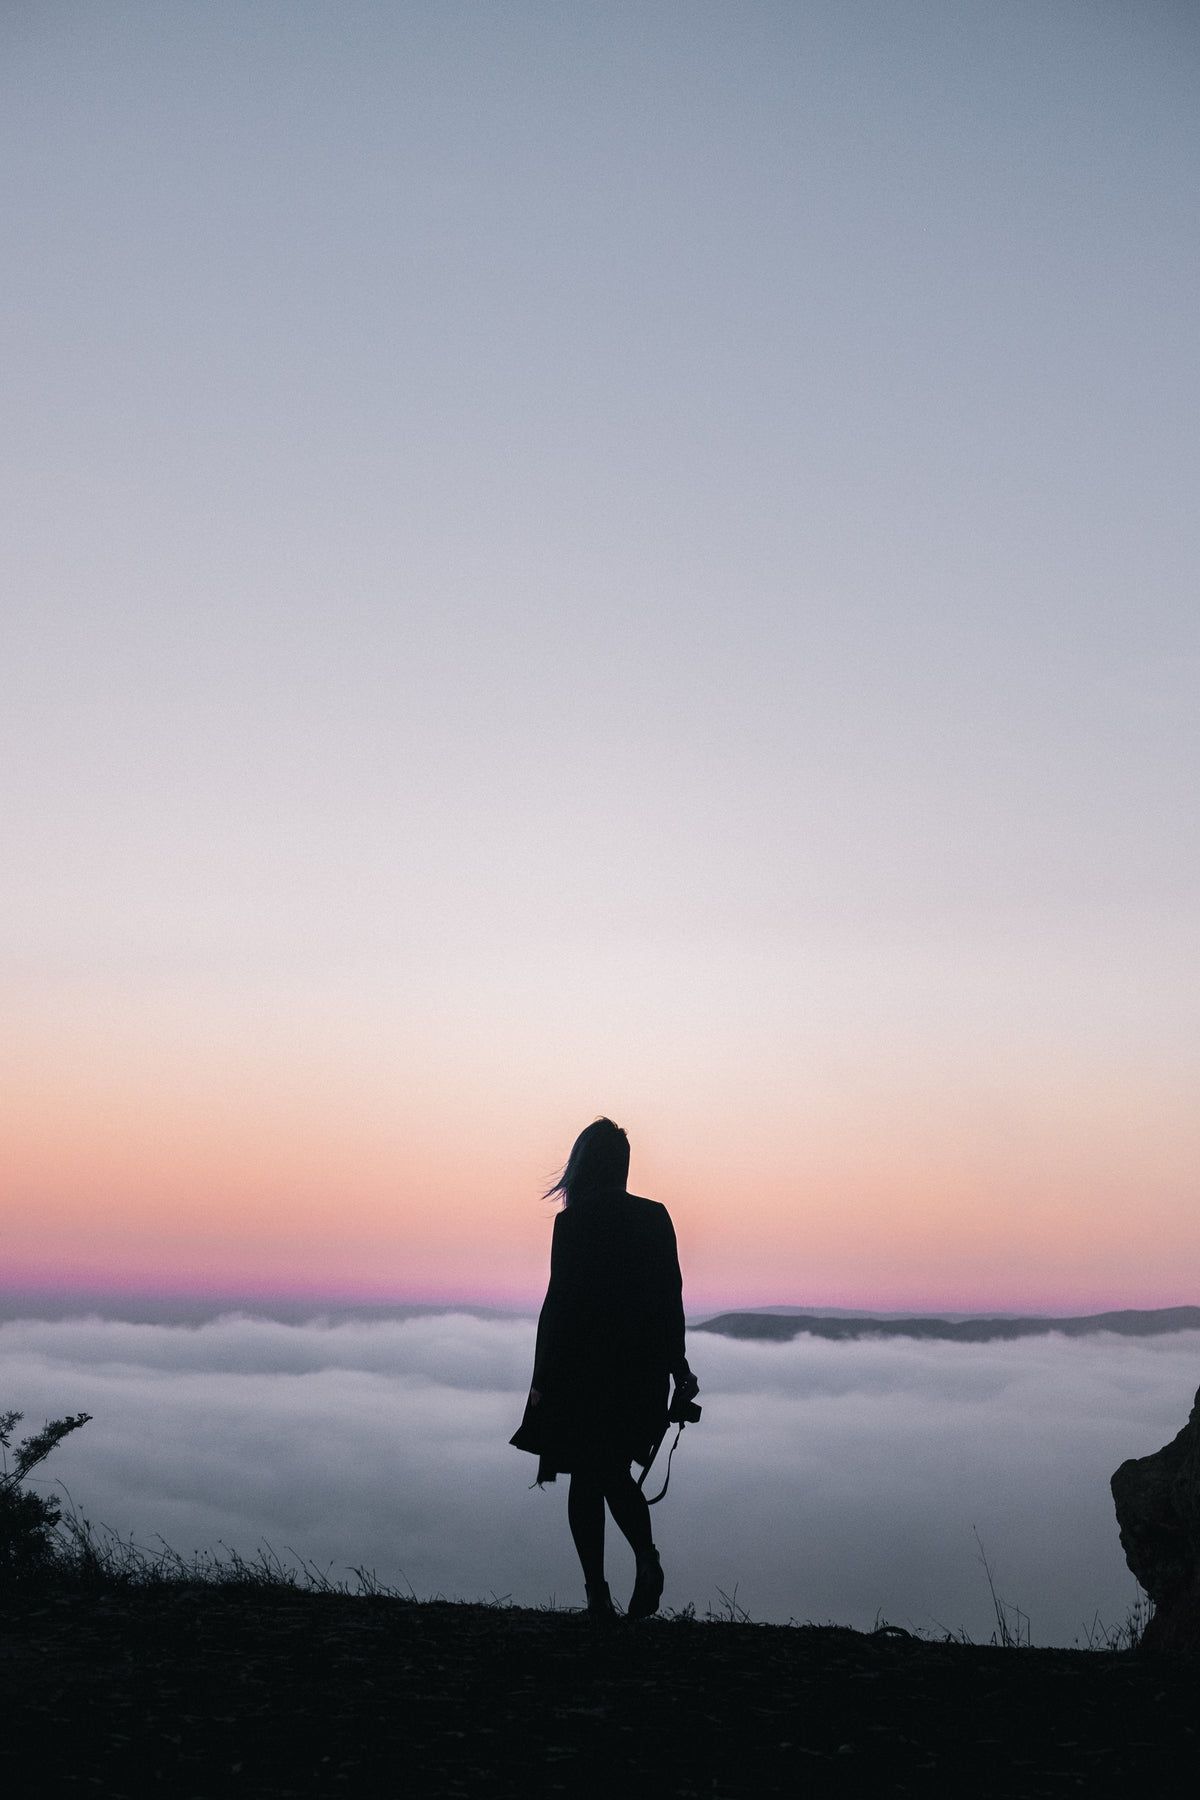 A woman standing on a hill with a sunset in the background - Photography